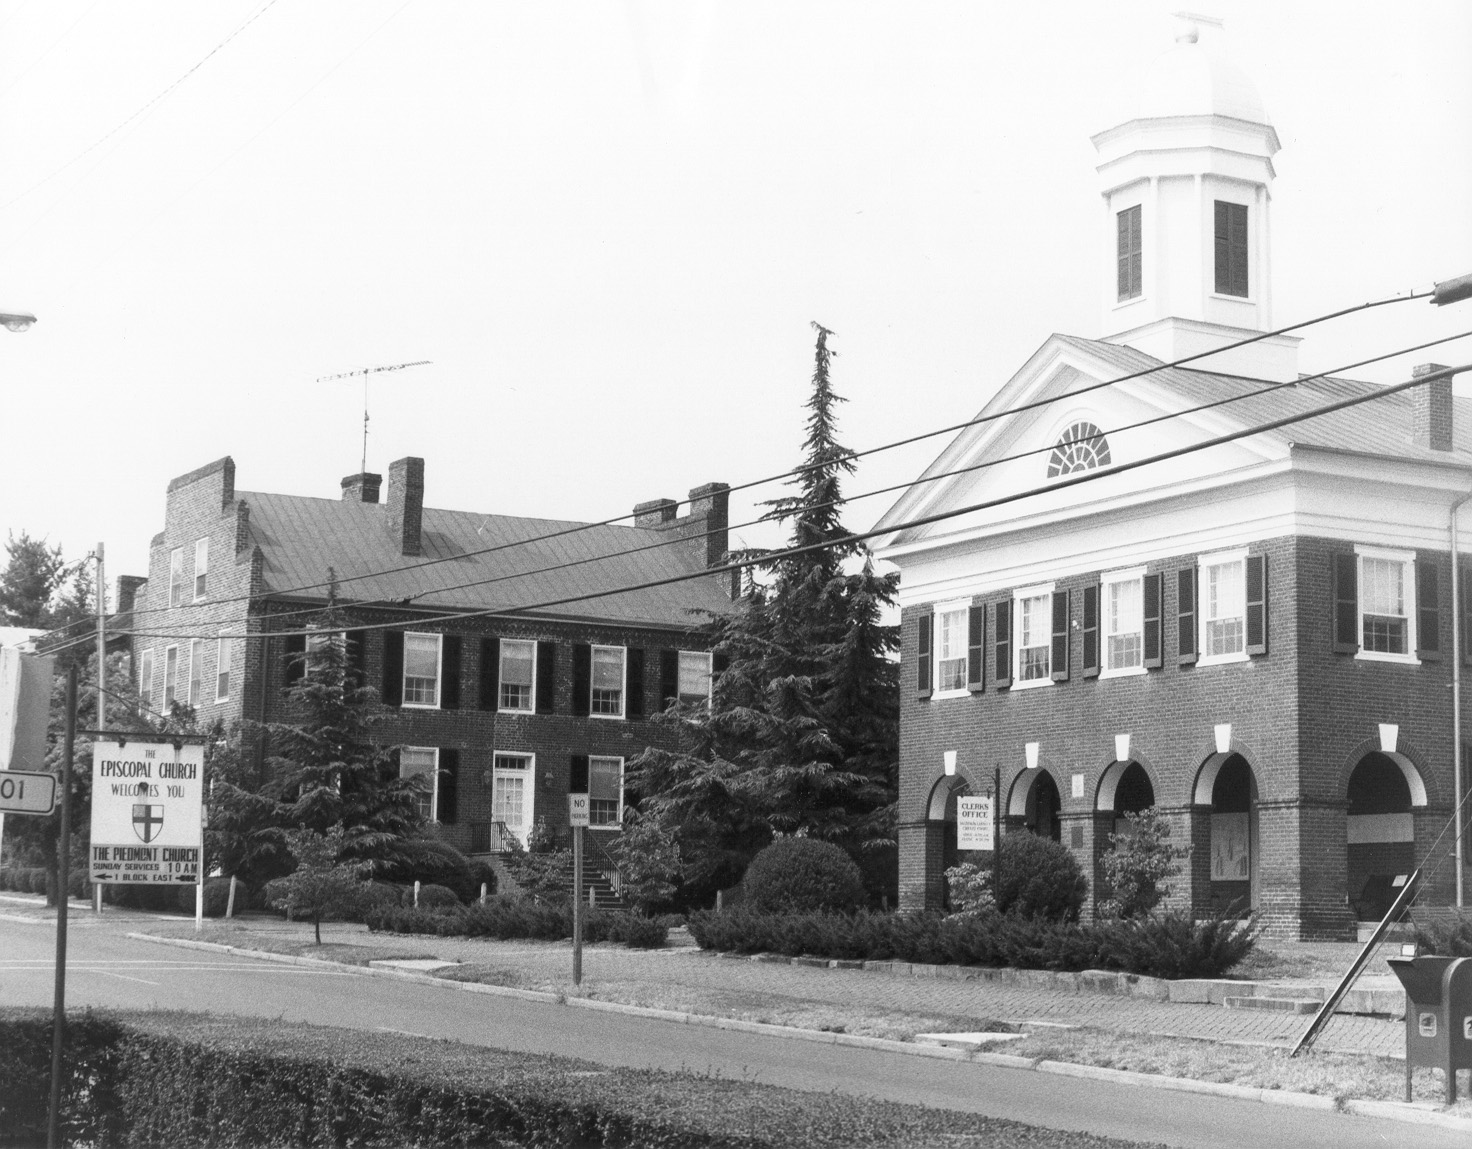 Tavern and Courthouse. Photo credit: Richard Cote/DHR, 1983